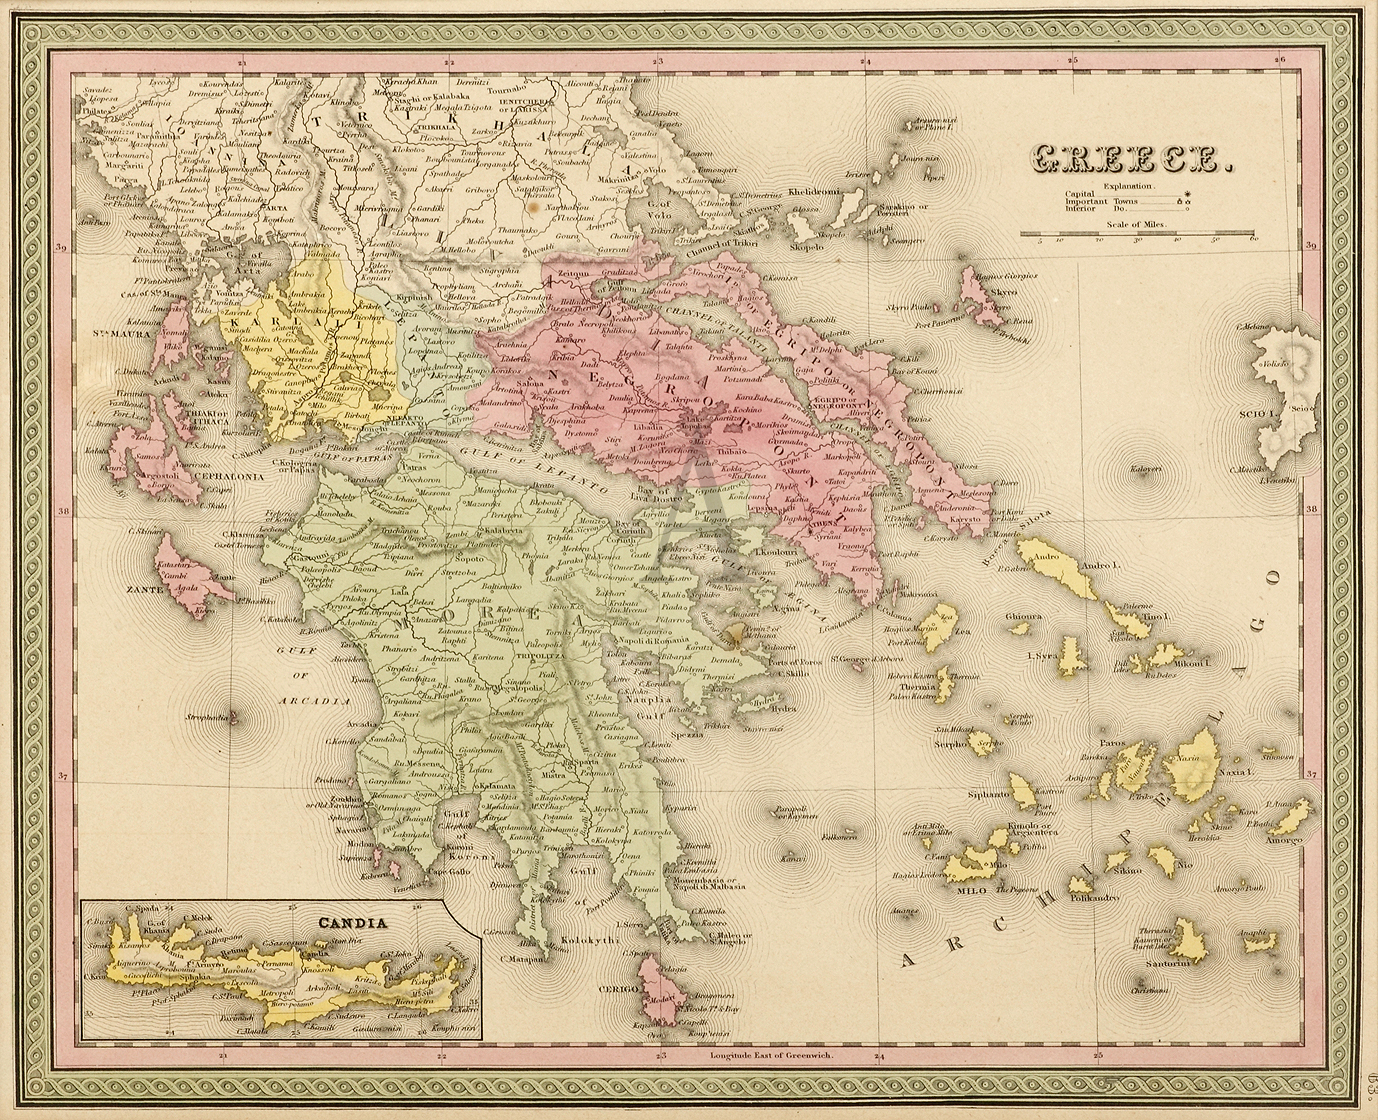 Greece - Antique Print from 1850